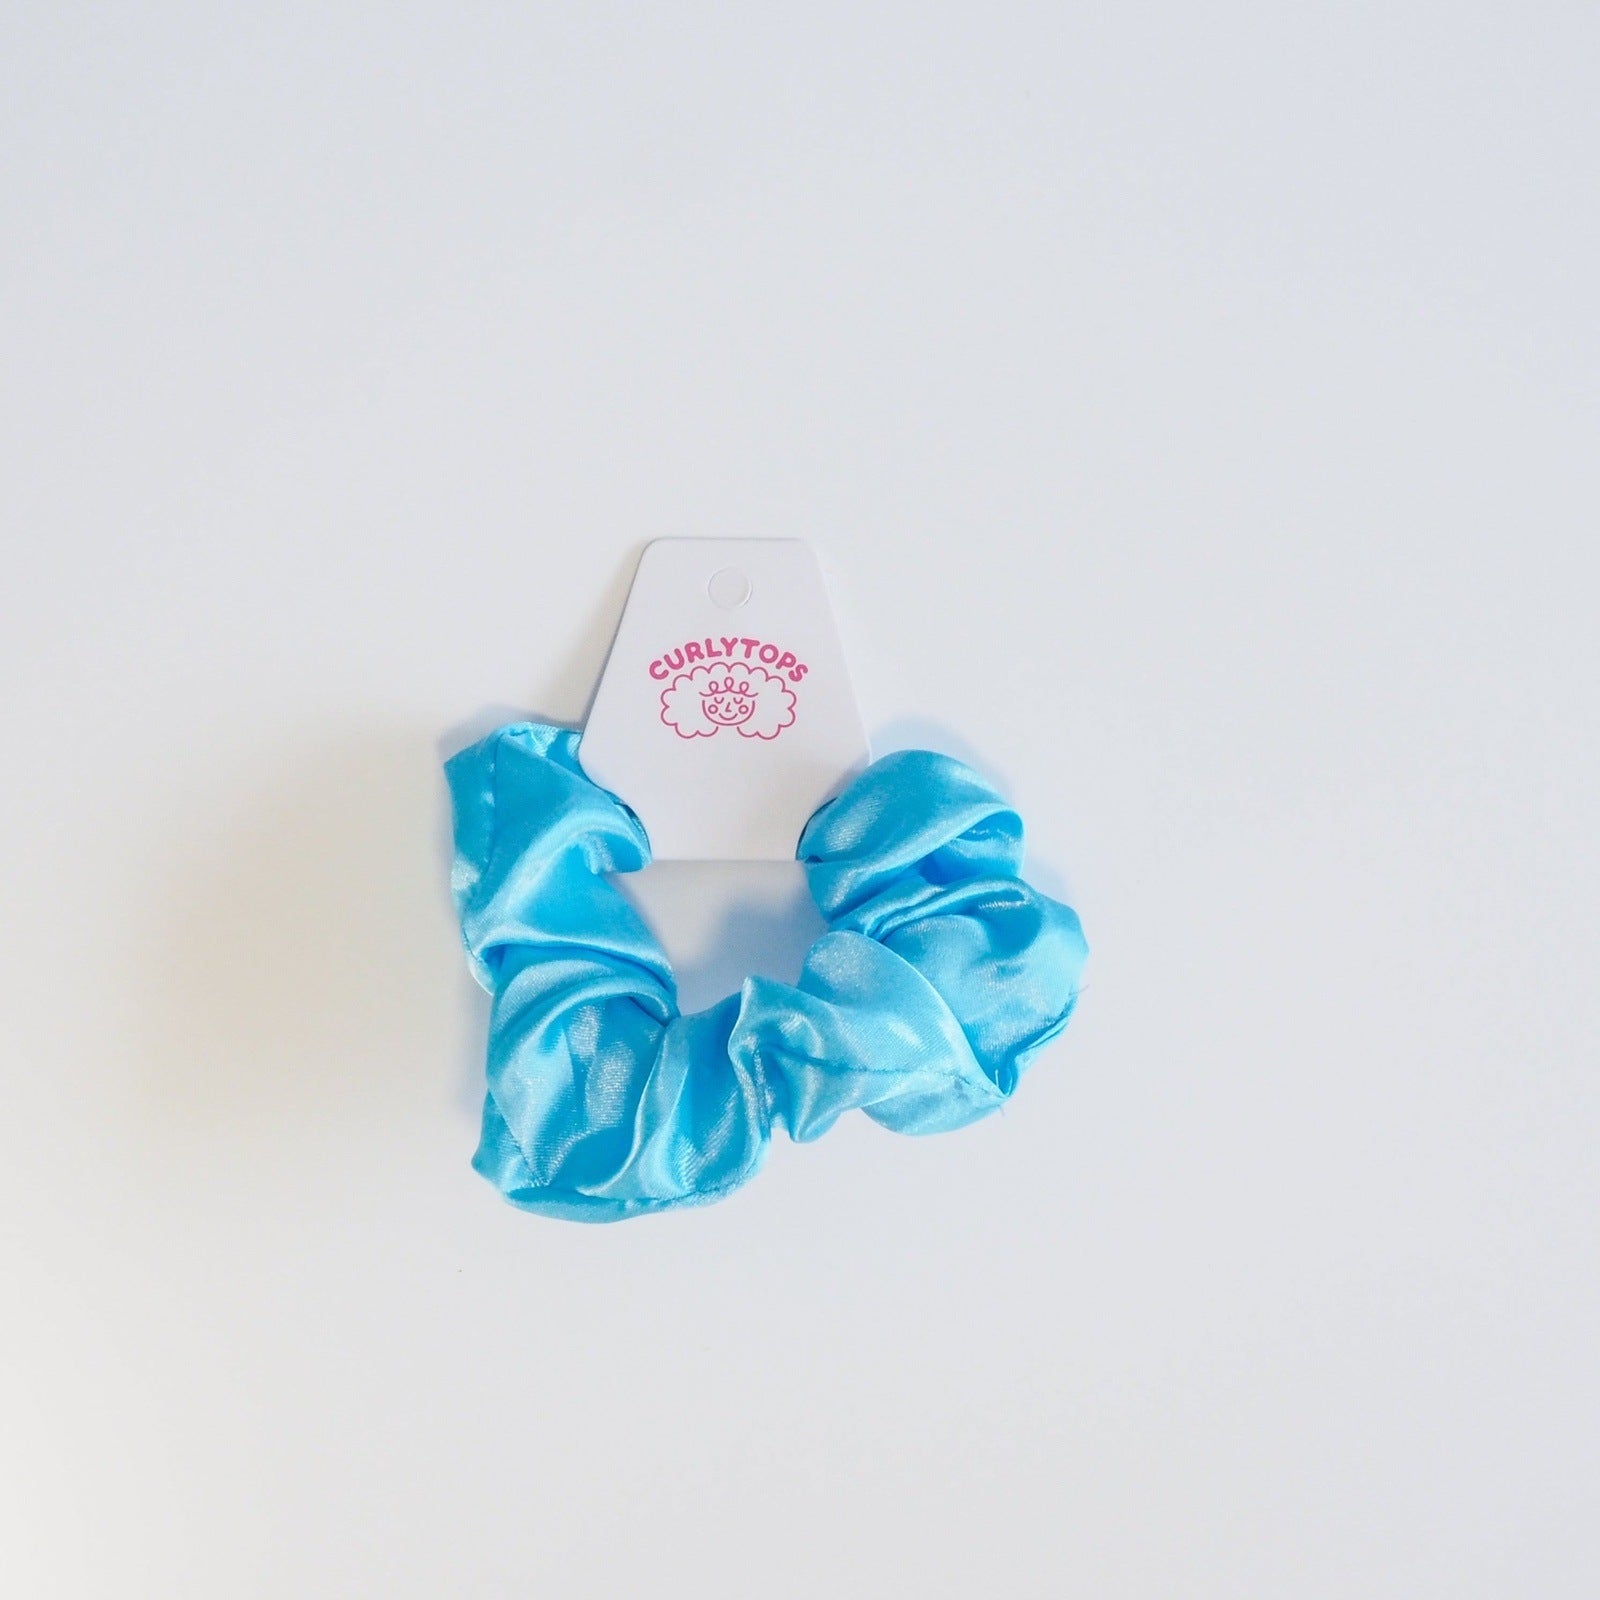 Curlytops Blue Satin Hair Scrunchie for curly hair protection 